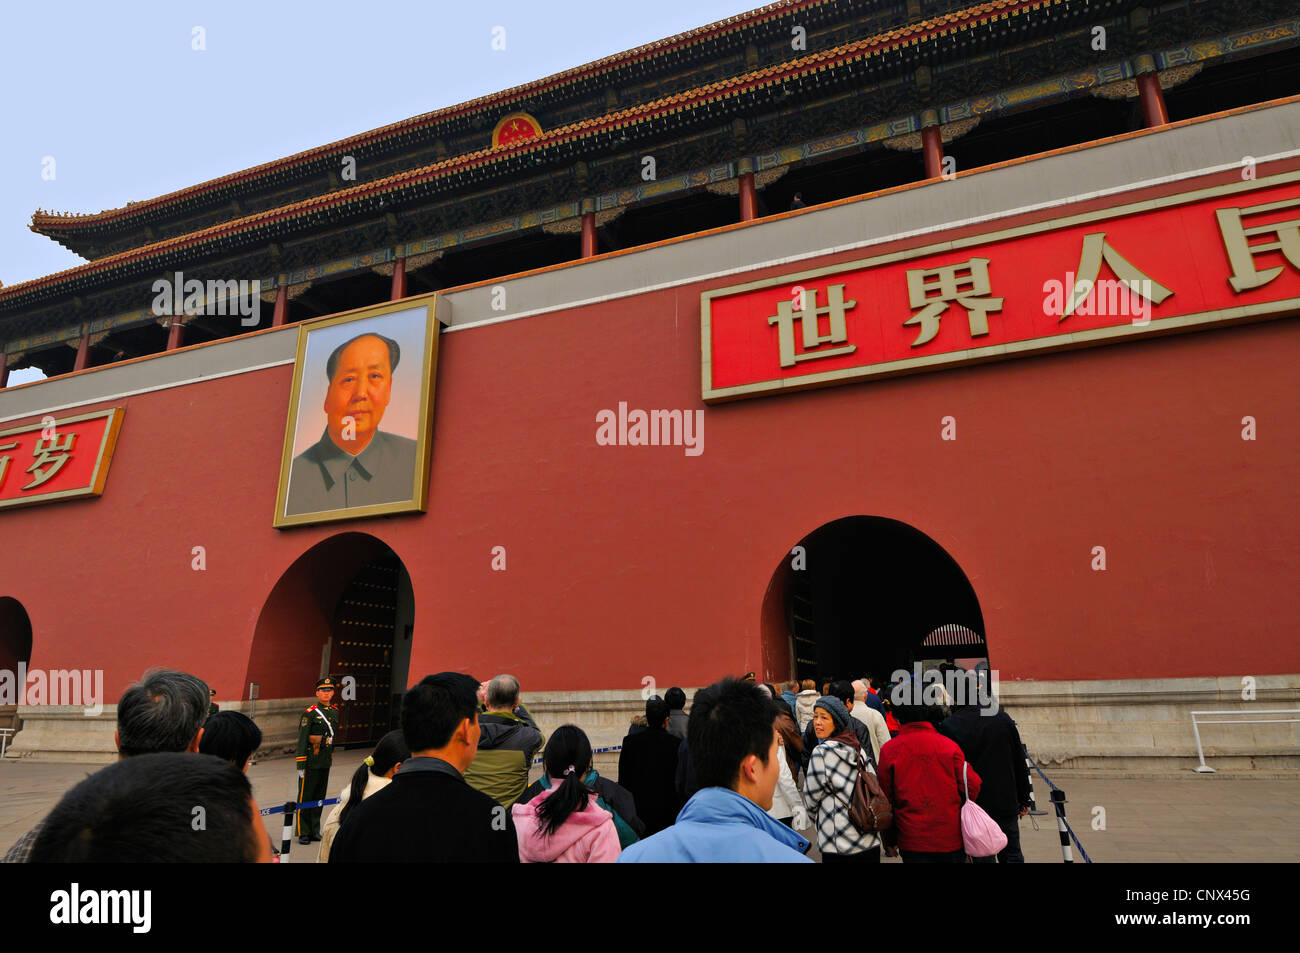 People queue for entrance below the portrait of Chairman Mao on the outer gate to the Forbidden City, Beijing, China. Stock Photo